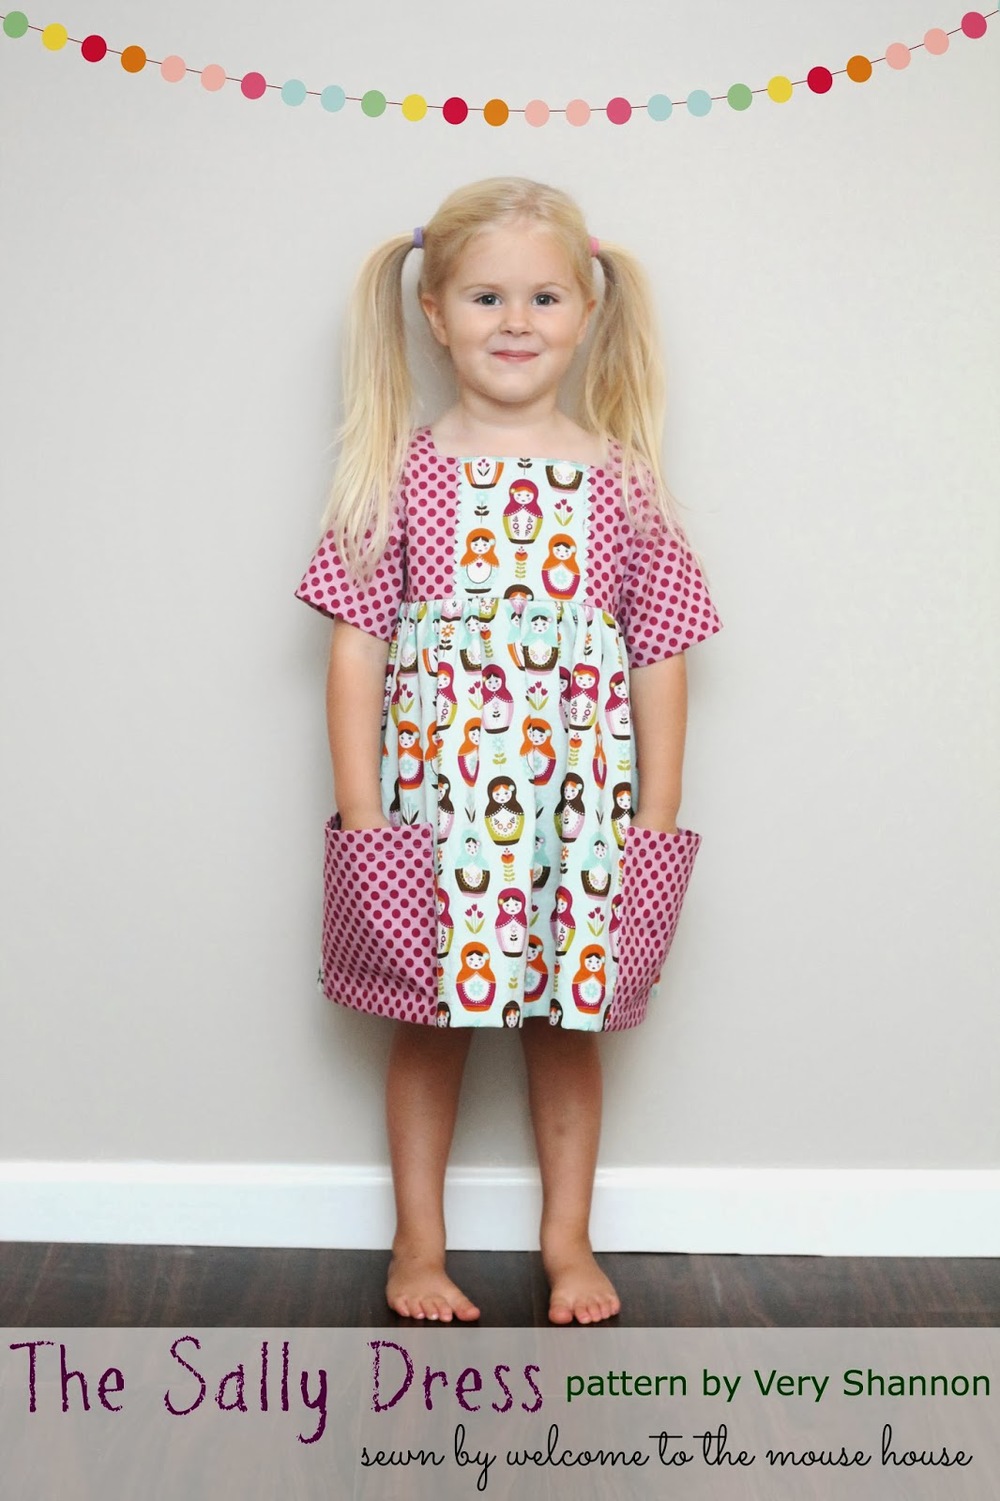 Sally Dress Pattern by Very Shannon sewn by Welcome to the Mouse House